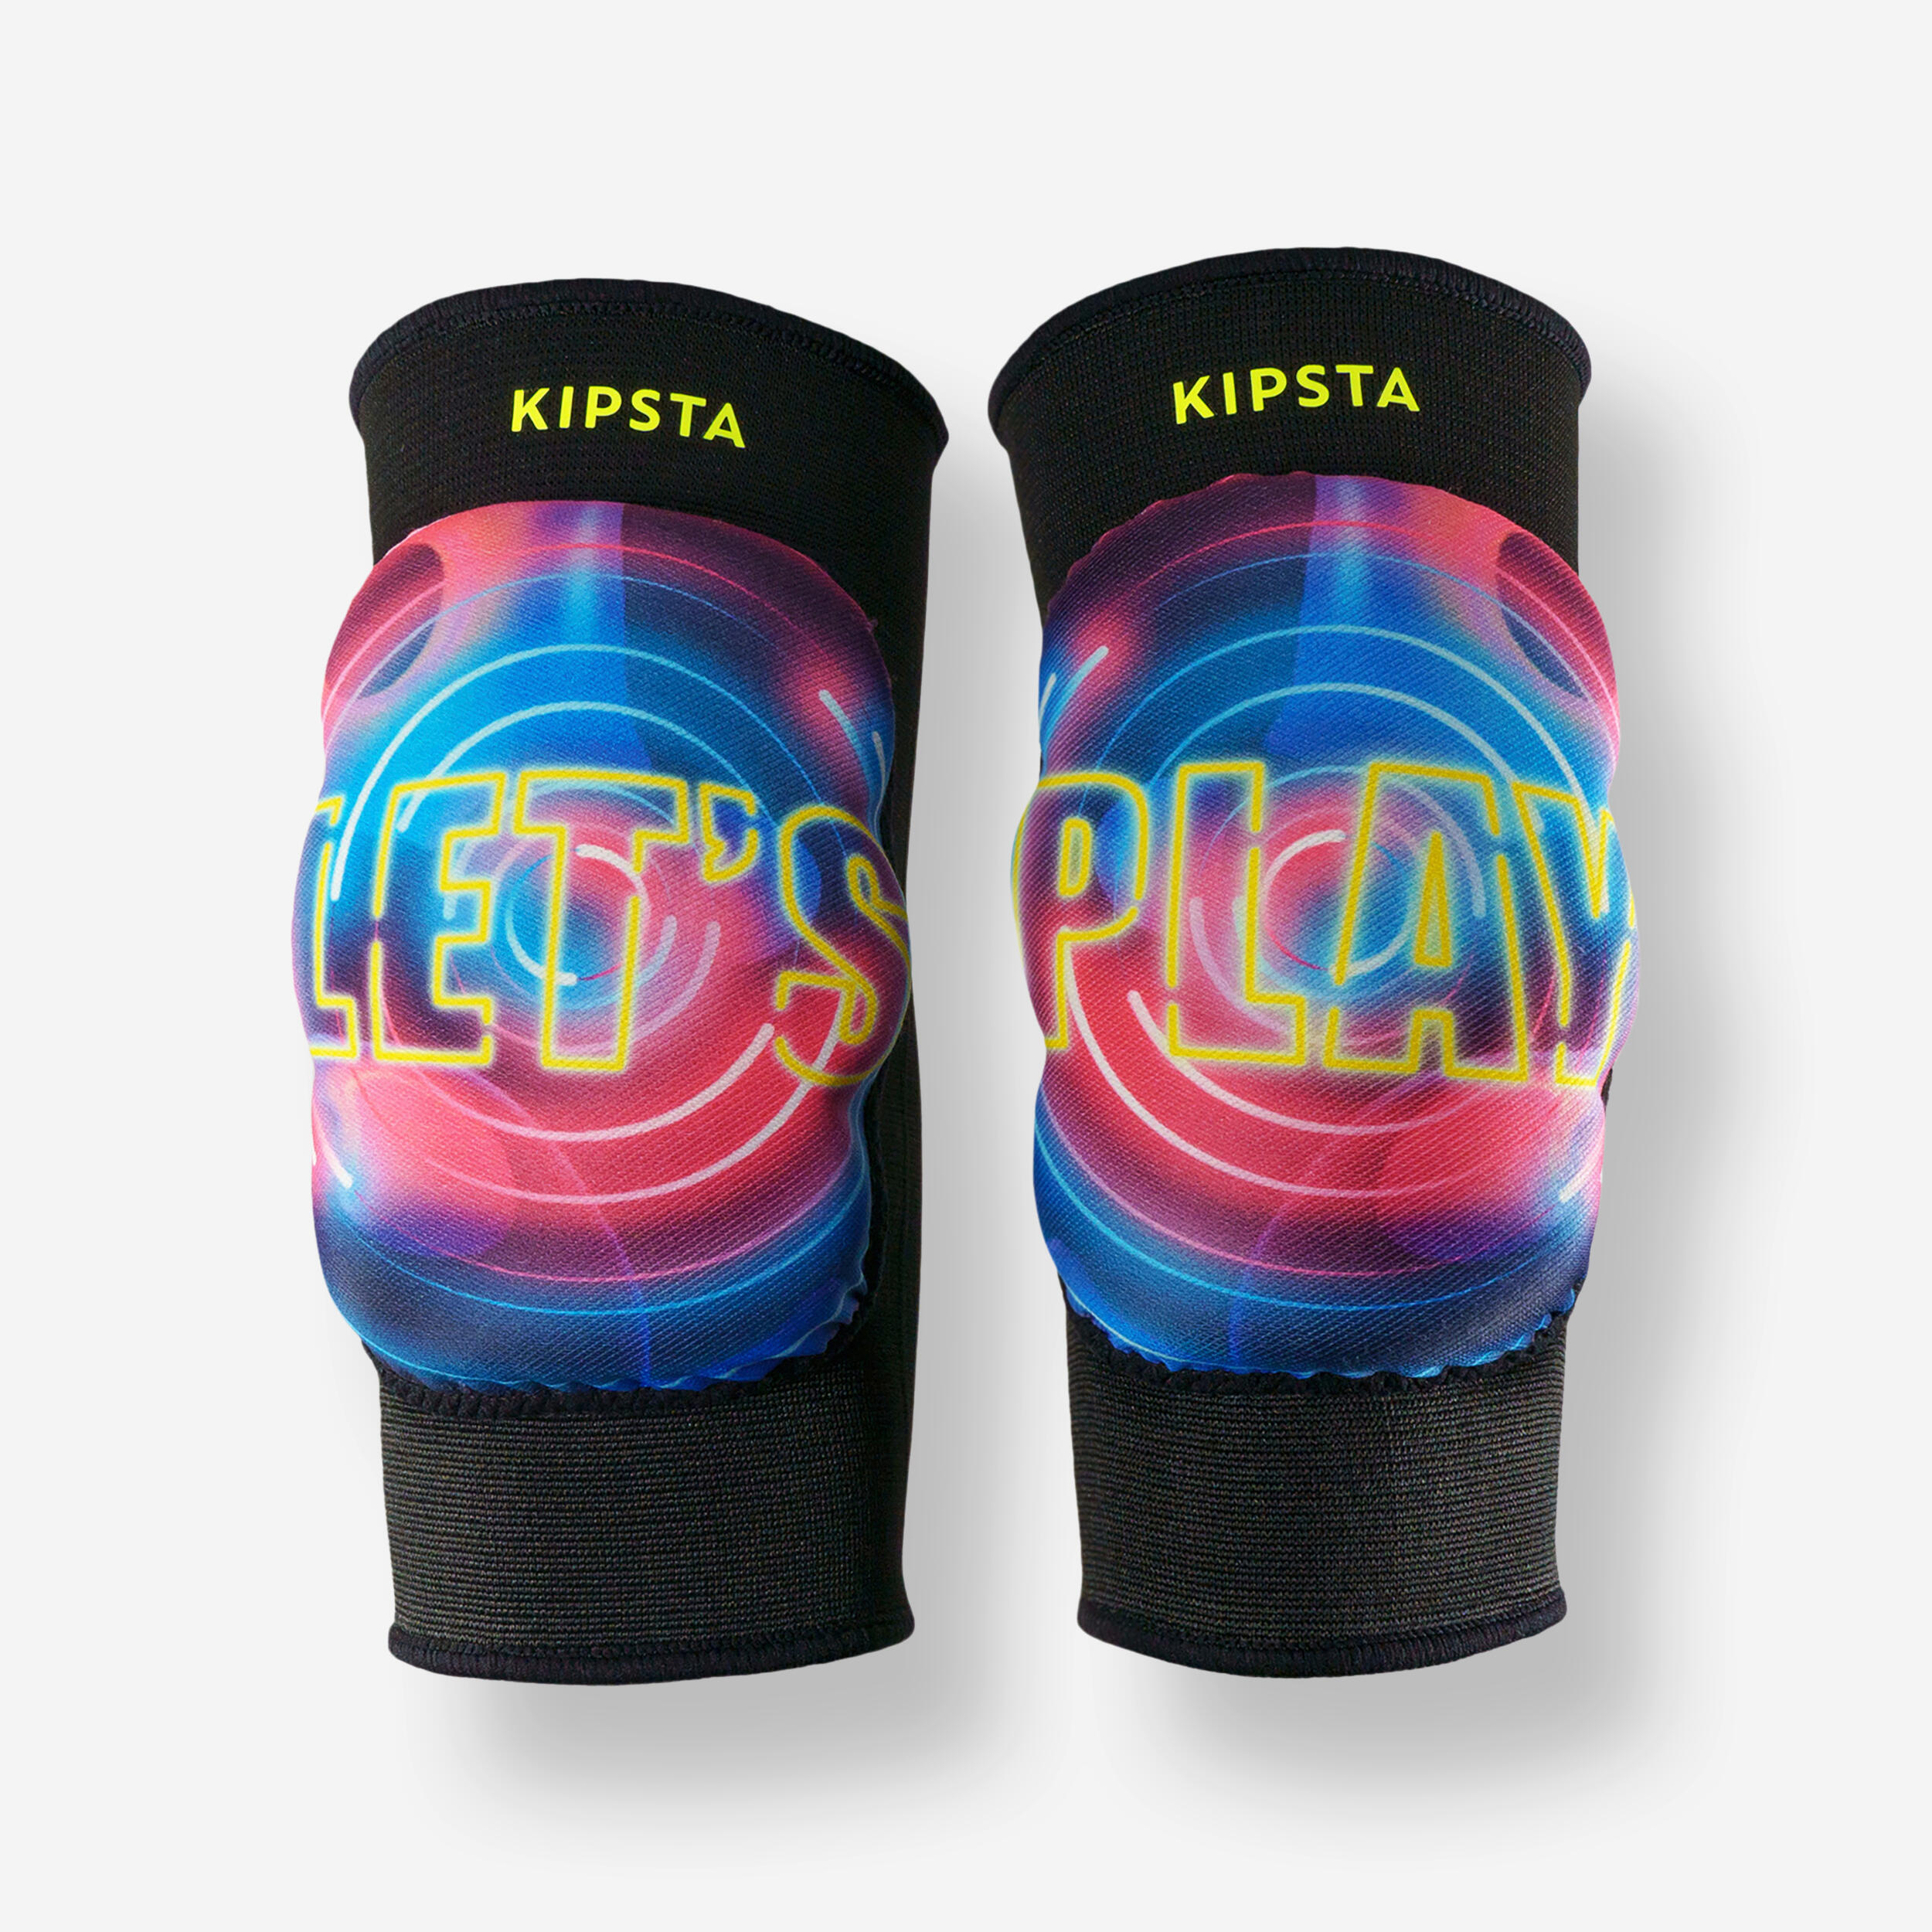 KIPSTA Volleyball Knee Pads VKP100 Let's Play - Black